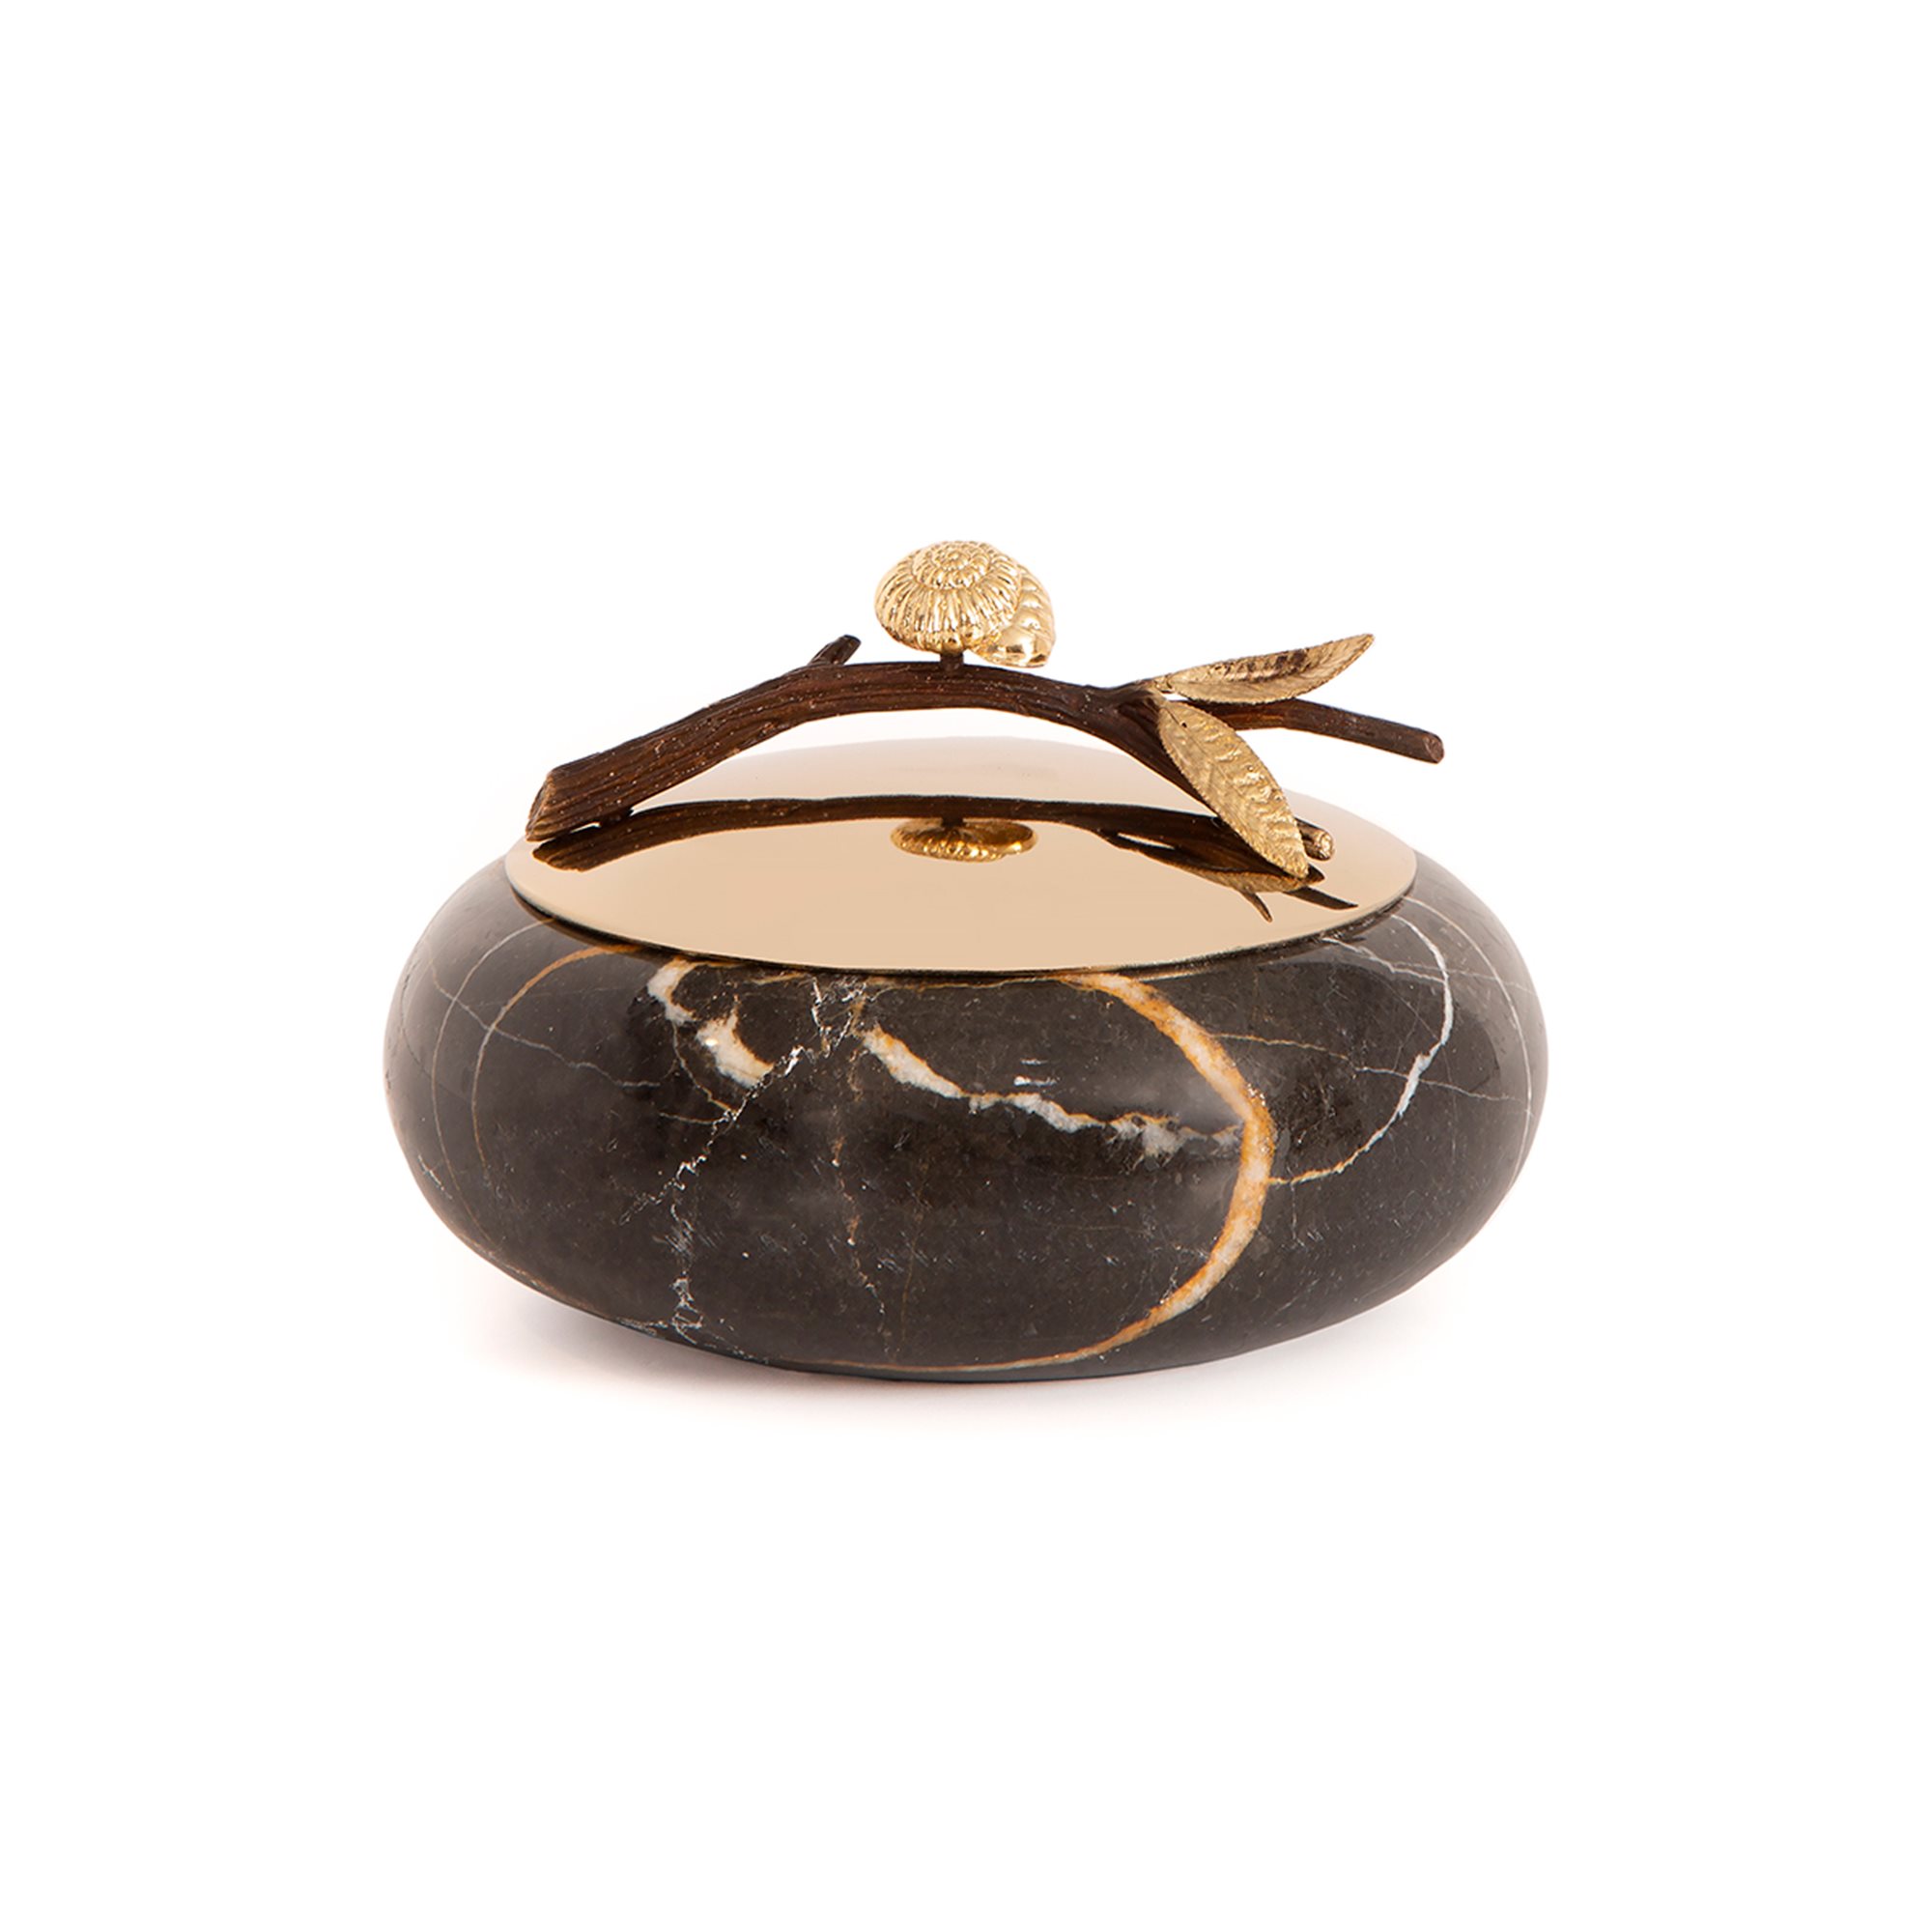 Snail Stone Bowl with Lid (Size C1)